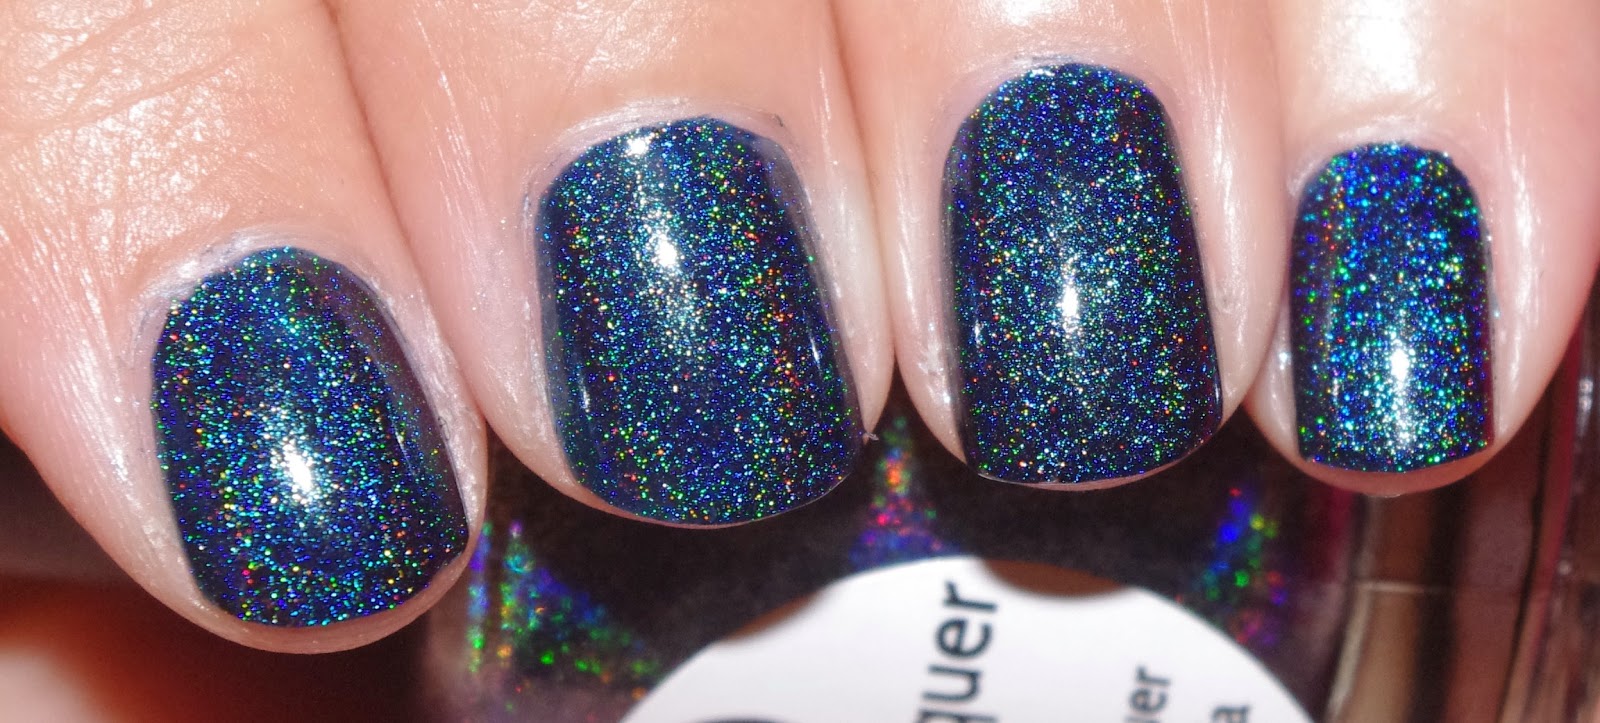 6. DND Gel & Lacquer Duo in "Blue Lagoon" - wide 7